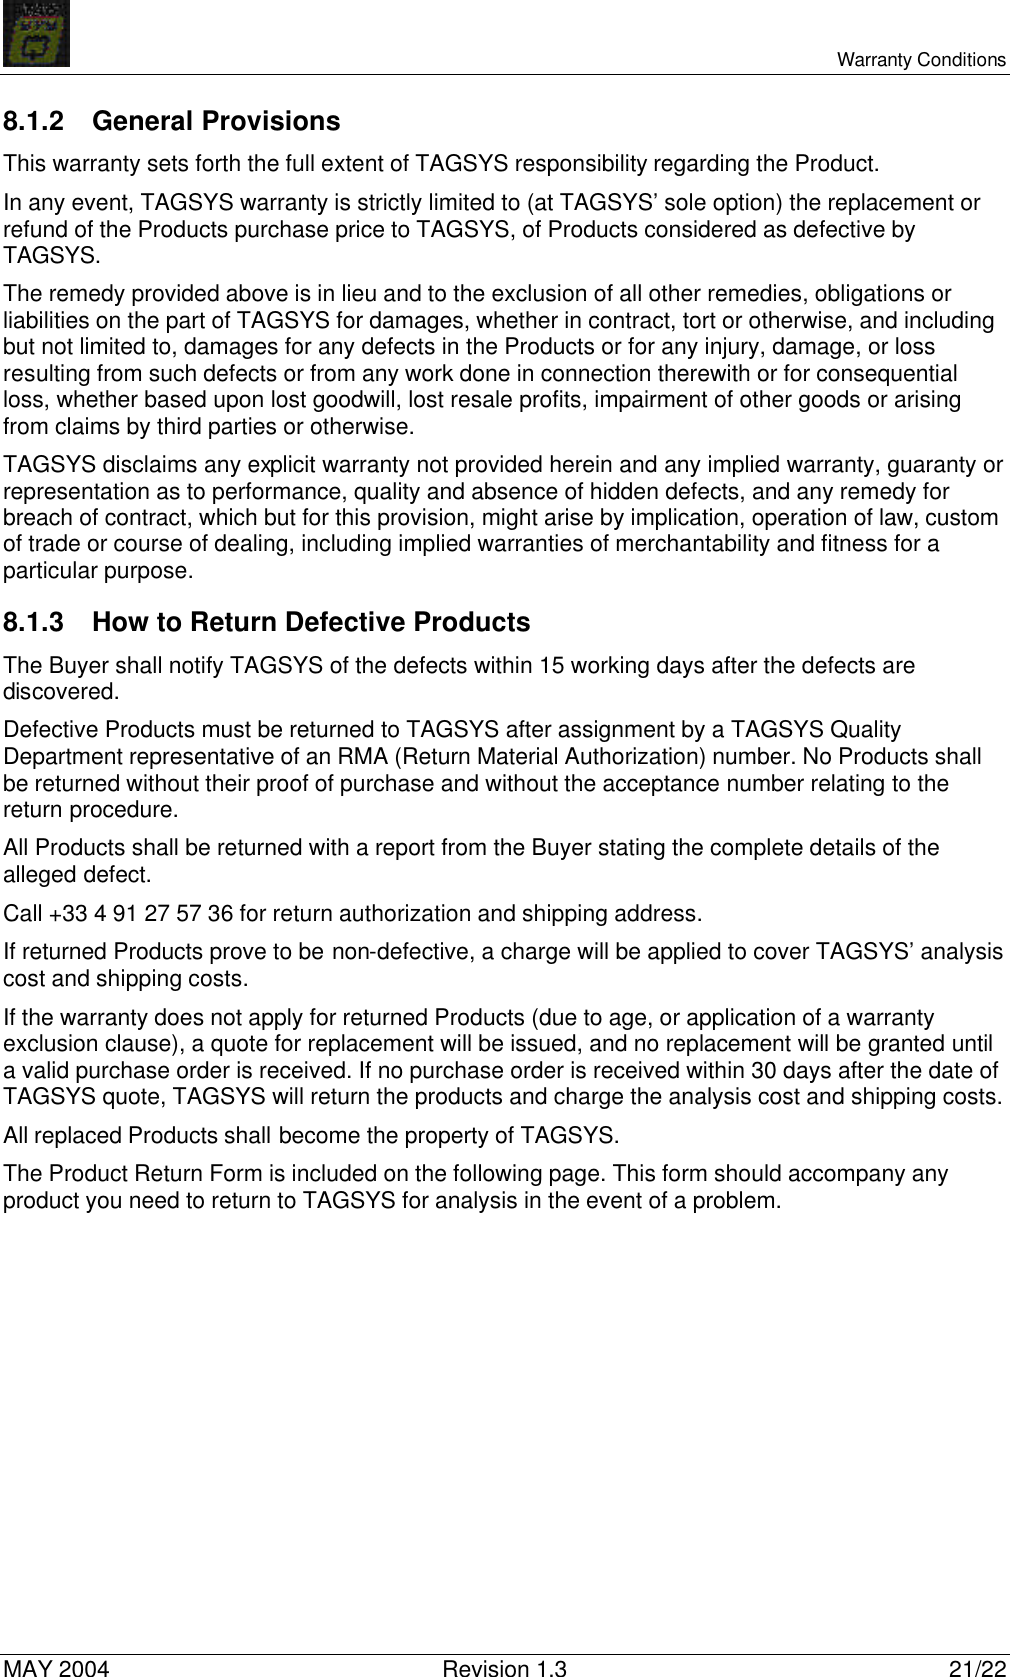     Warranty Conditions MAY 2004 Revision 1.3 21/22 8.1.2 General Provisions This warranty sets forth the full extent of TAGSYS responsibility regarding the Product. In any event, TAGSYS warranty is strictly limited to (at TAGSYS’ sole option) the replacement or refund of the Products purchase price to TAGSYS, of Products considered as defective by TAGSYS. The remedy provided above is in lieu and to the exclusion of all other remedies, obligations or liabilities on the part of TAGSYS for damages, whether in contract, tort or otherwise, and including but not limited to, damages for any defects in the Products or for any injury, damage, or loss resulting from such defects or from any work done in connection therewith or for consequential loss, whether based upon lost goodwill, lost resale profits, impairment of other goods or arising from claims by third parties or otherwise. TAGSYS disclaims any explicit warranty not provided herein and any implied warranty, guaranty or representation as to performance, quality and absence of hidden defects, and any remedy for breach of contract, which but for this provision, might arise by implication, operation of law, custom of trade or course of dealing, including implied warranties of merchantability and fitness for a particular purpose. 8.1.3 How to Return Defective Products The Buyer shall notify TAGSYS of the defects within 15 working days after the defects are discovered. Defective Products must be returned to TAGSYS after assignment by a TAGSYS Quality Department representative of an RMA (Return Material Authorization) number. No Products shall be returned without their proof of purchase and without the acceptance number relating to the return procedure. All Products shall be returned with a report from the Buyer stating the complete details of the alleged defect. Call +33 4 91 27 57 36 for return authorization and shipping address. If returned Products prove to be non-defective, a charge will be applied to cover TAGSYS’ analysis cost and shipping costs. If the warranty does not apply for returned Products (due to age, or application of a warranty exclusion clause), a quote for replacement will be issued, and no replacement will be granted until a valid purchase order is received. If no purchase order is received within 30 days after the date of TAGSYS quote, TAGSYS will return the products and charge the analysis cost and shipping costs. All replaced Products shall become the property of TAGSYS. The Product Return Form is included on the following page. This form should accompany any product you need to return to TAGSYS for analysis in the event of a problem. 